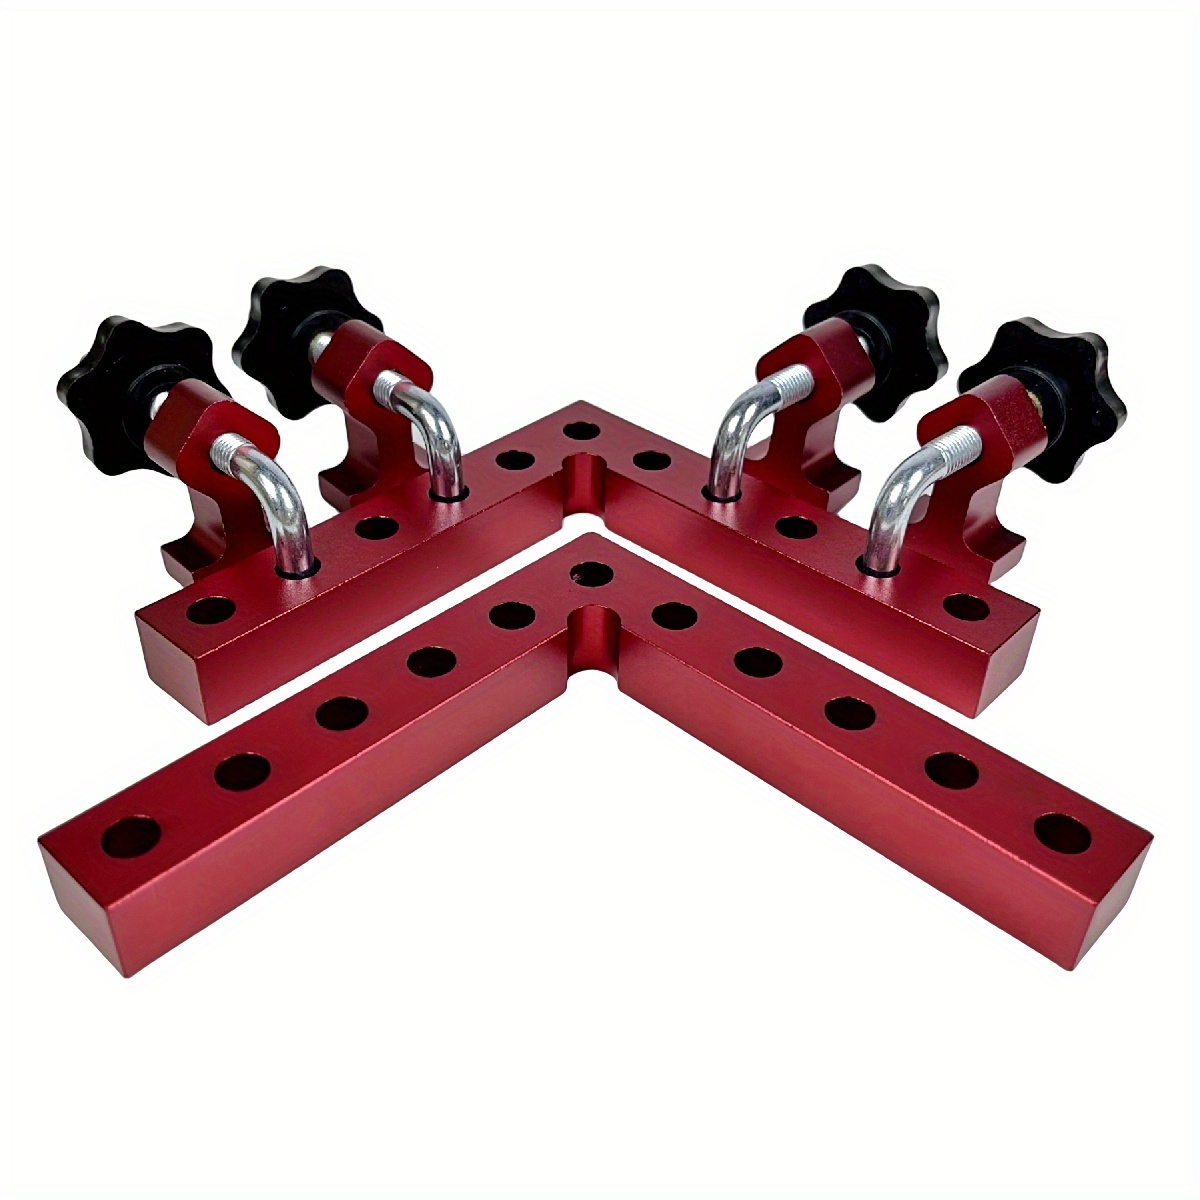 DICATTE 90 Degree Positioning Square Right Angle Clamp(5.5 +4.7) Aluminum  Alloy Woodworking Carpenter Tool,4 Pcs Right Angle Clamps With 4 Clamps,For  Picture Frame Box Cabinets Drawers (RED) 